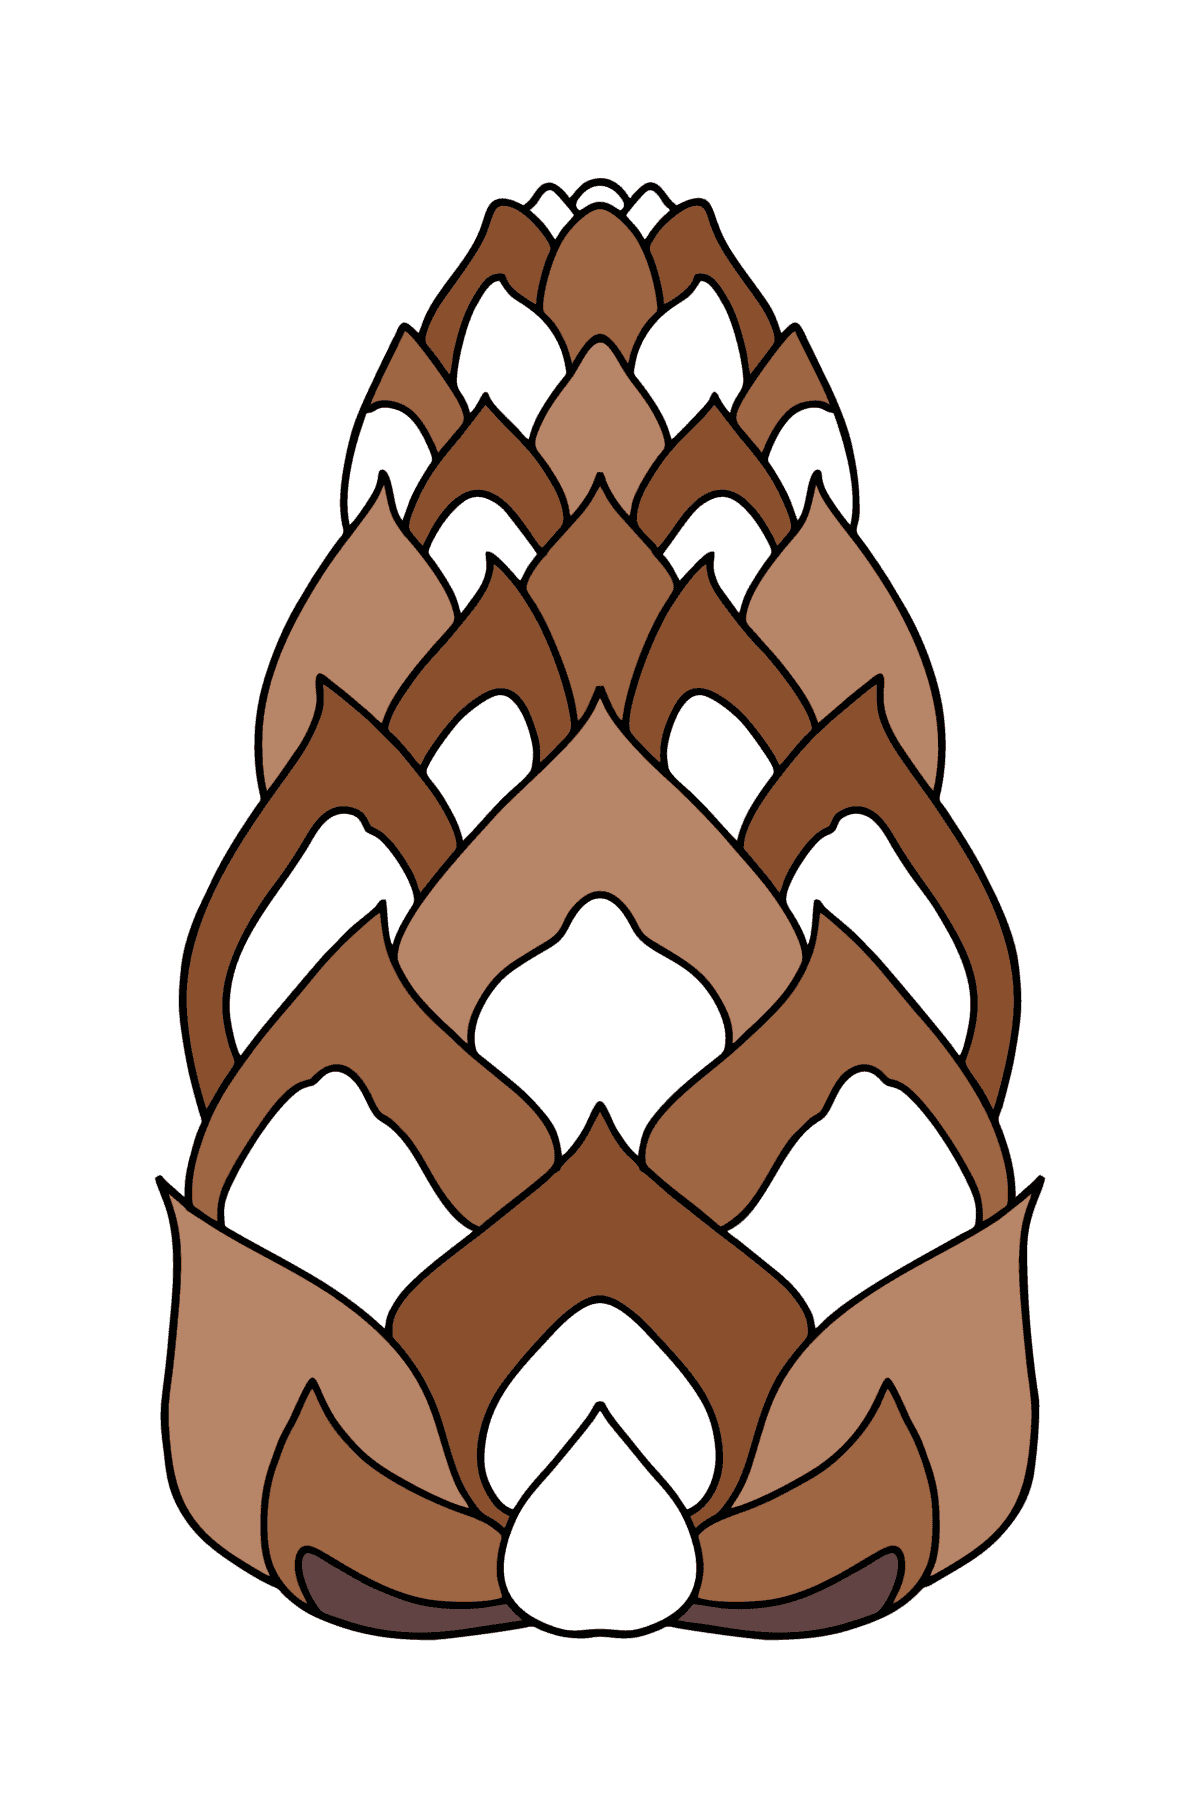 Pinecone from Lambert coloring page - Coloring Pages for Kids